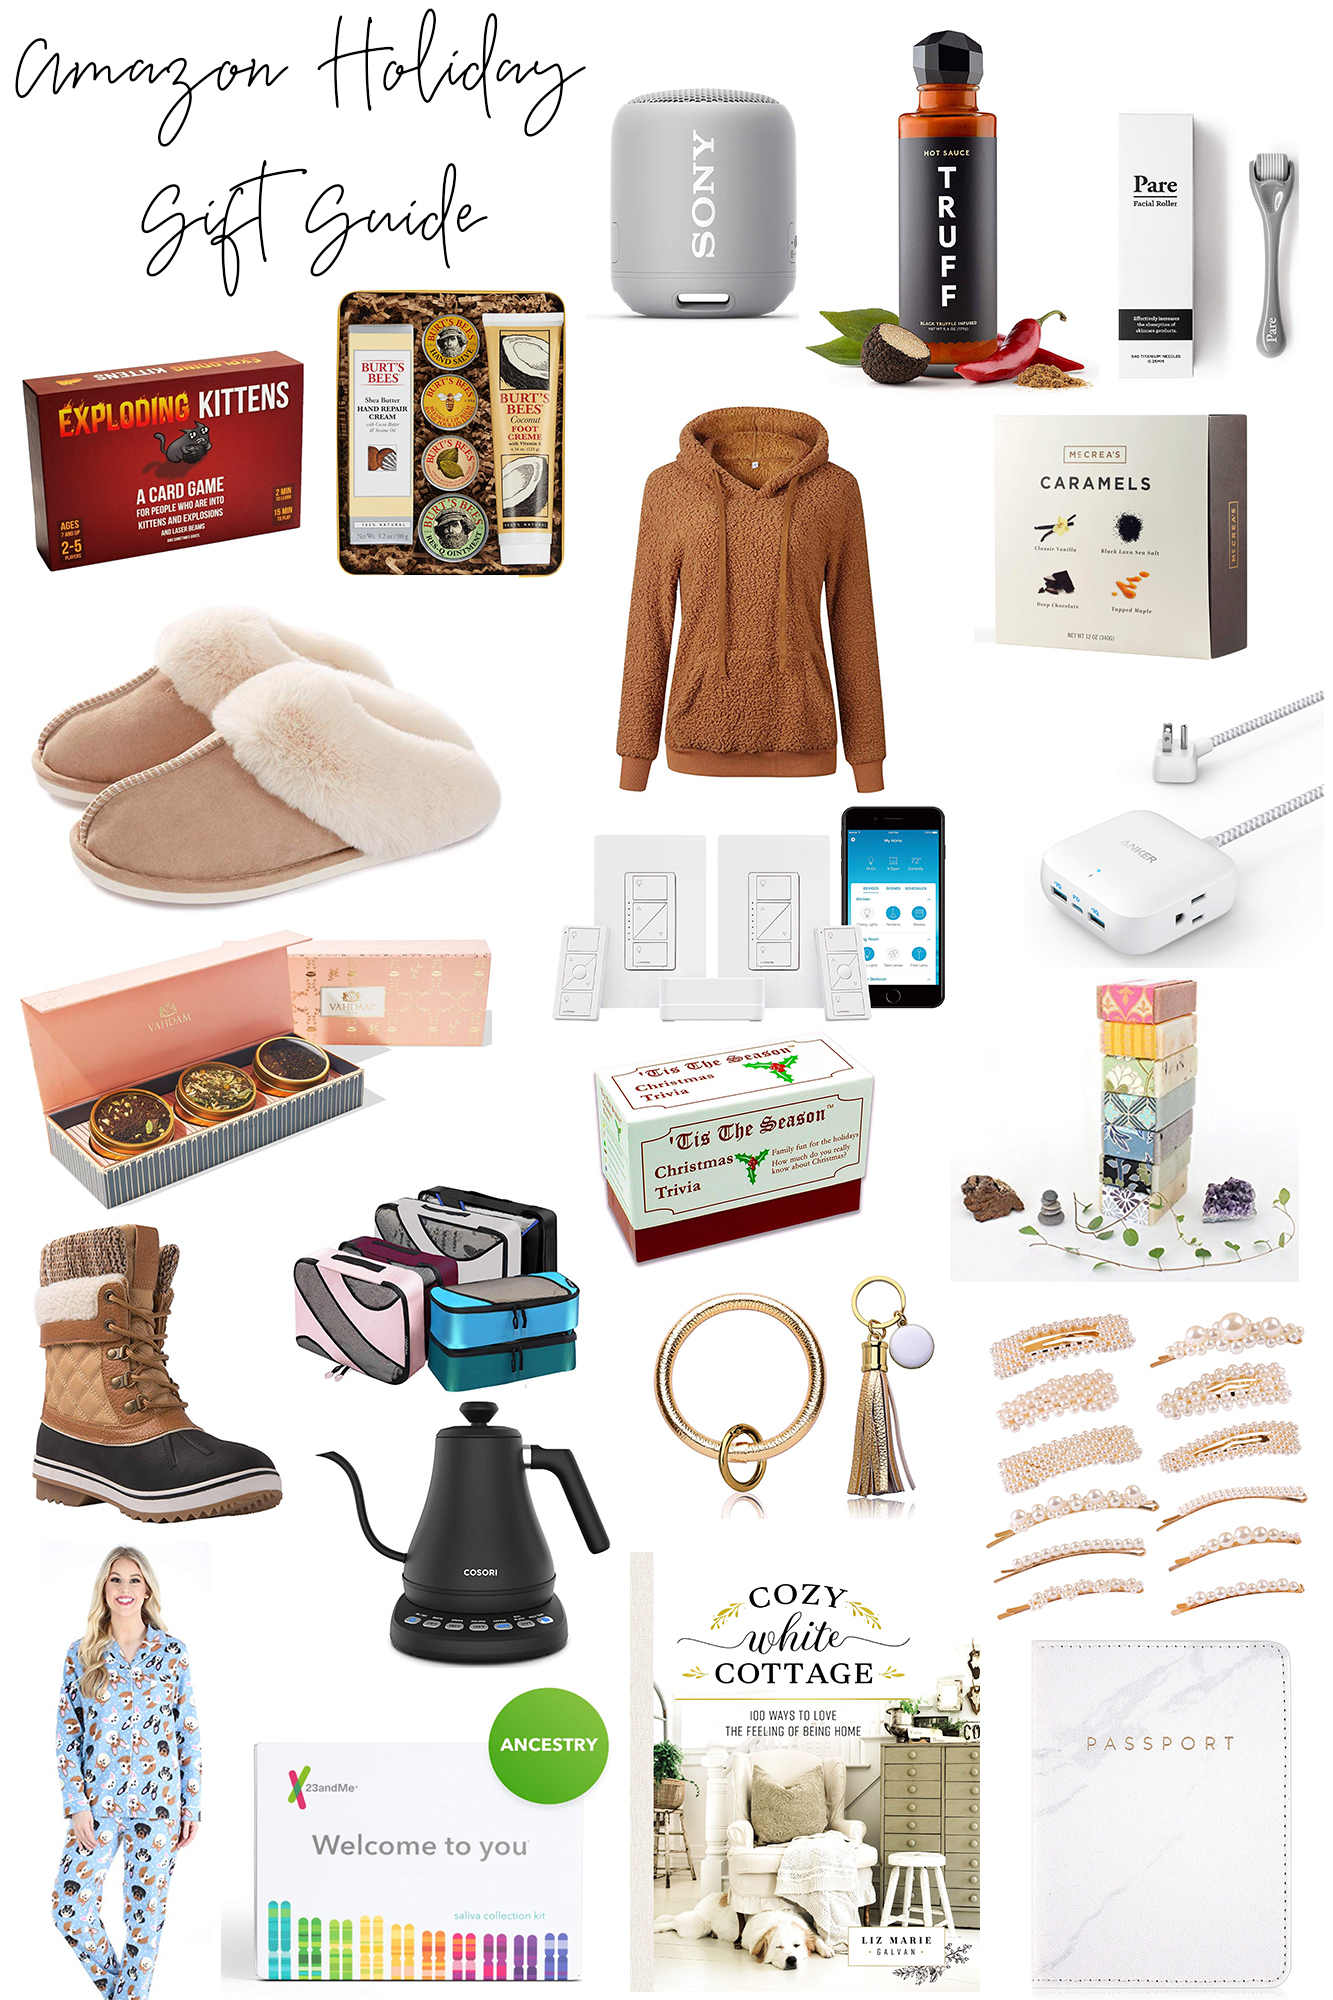 Amazon Christmas Gift Guide 2019 - The best holiday presents on Amazon for the holidays. SO many of these items are 2-day shipping & under $50. 